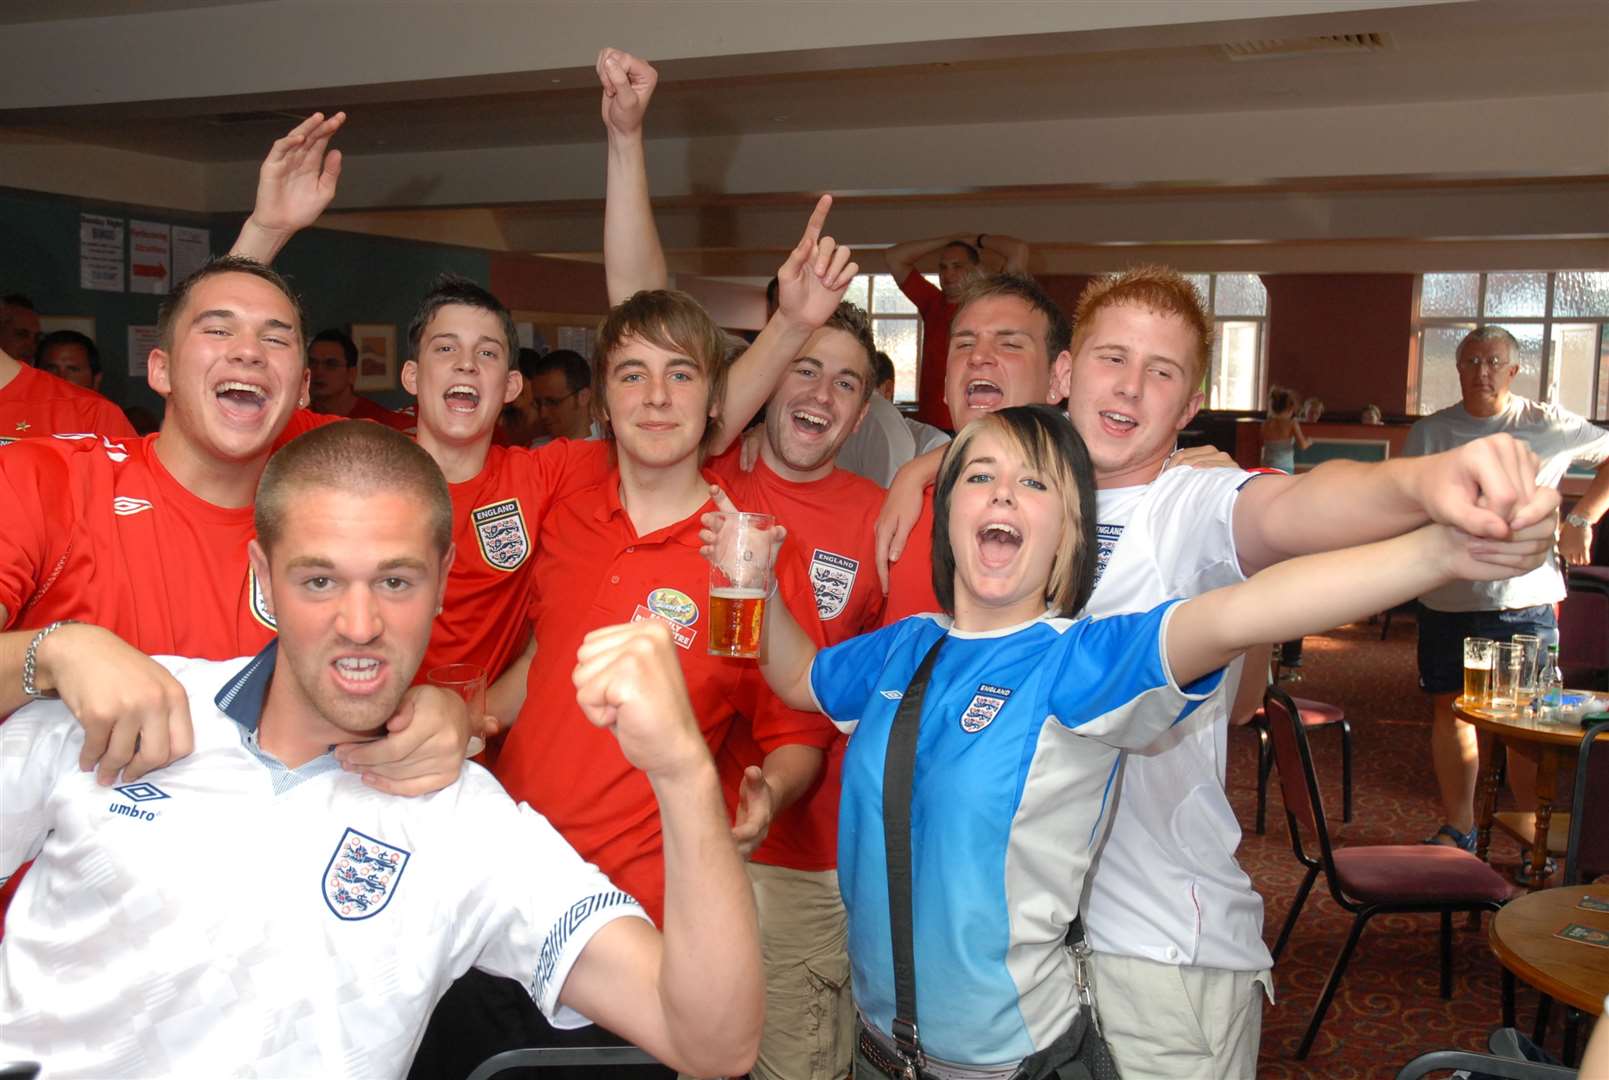 England game v. Portugal Supporters watch game at United Services Club Rainham (47812694)